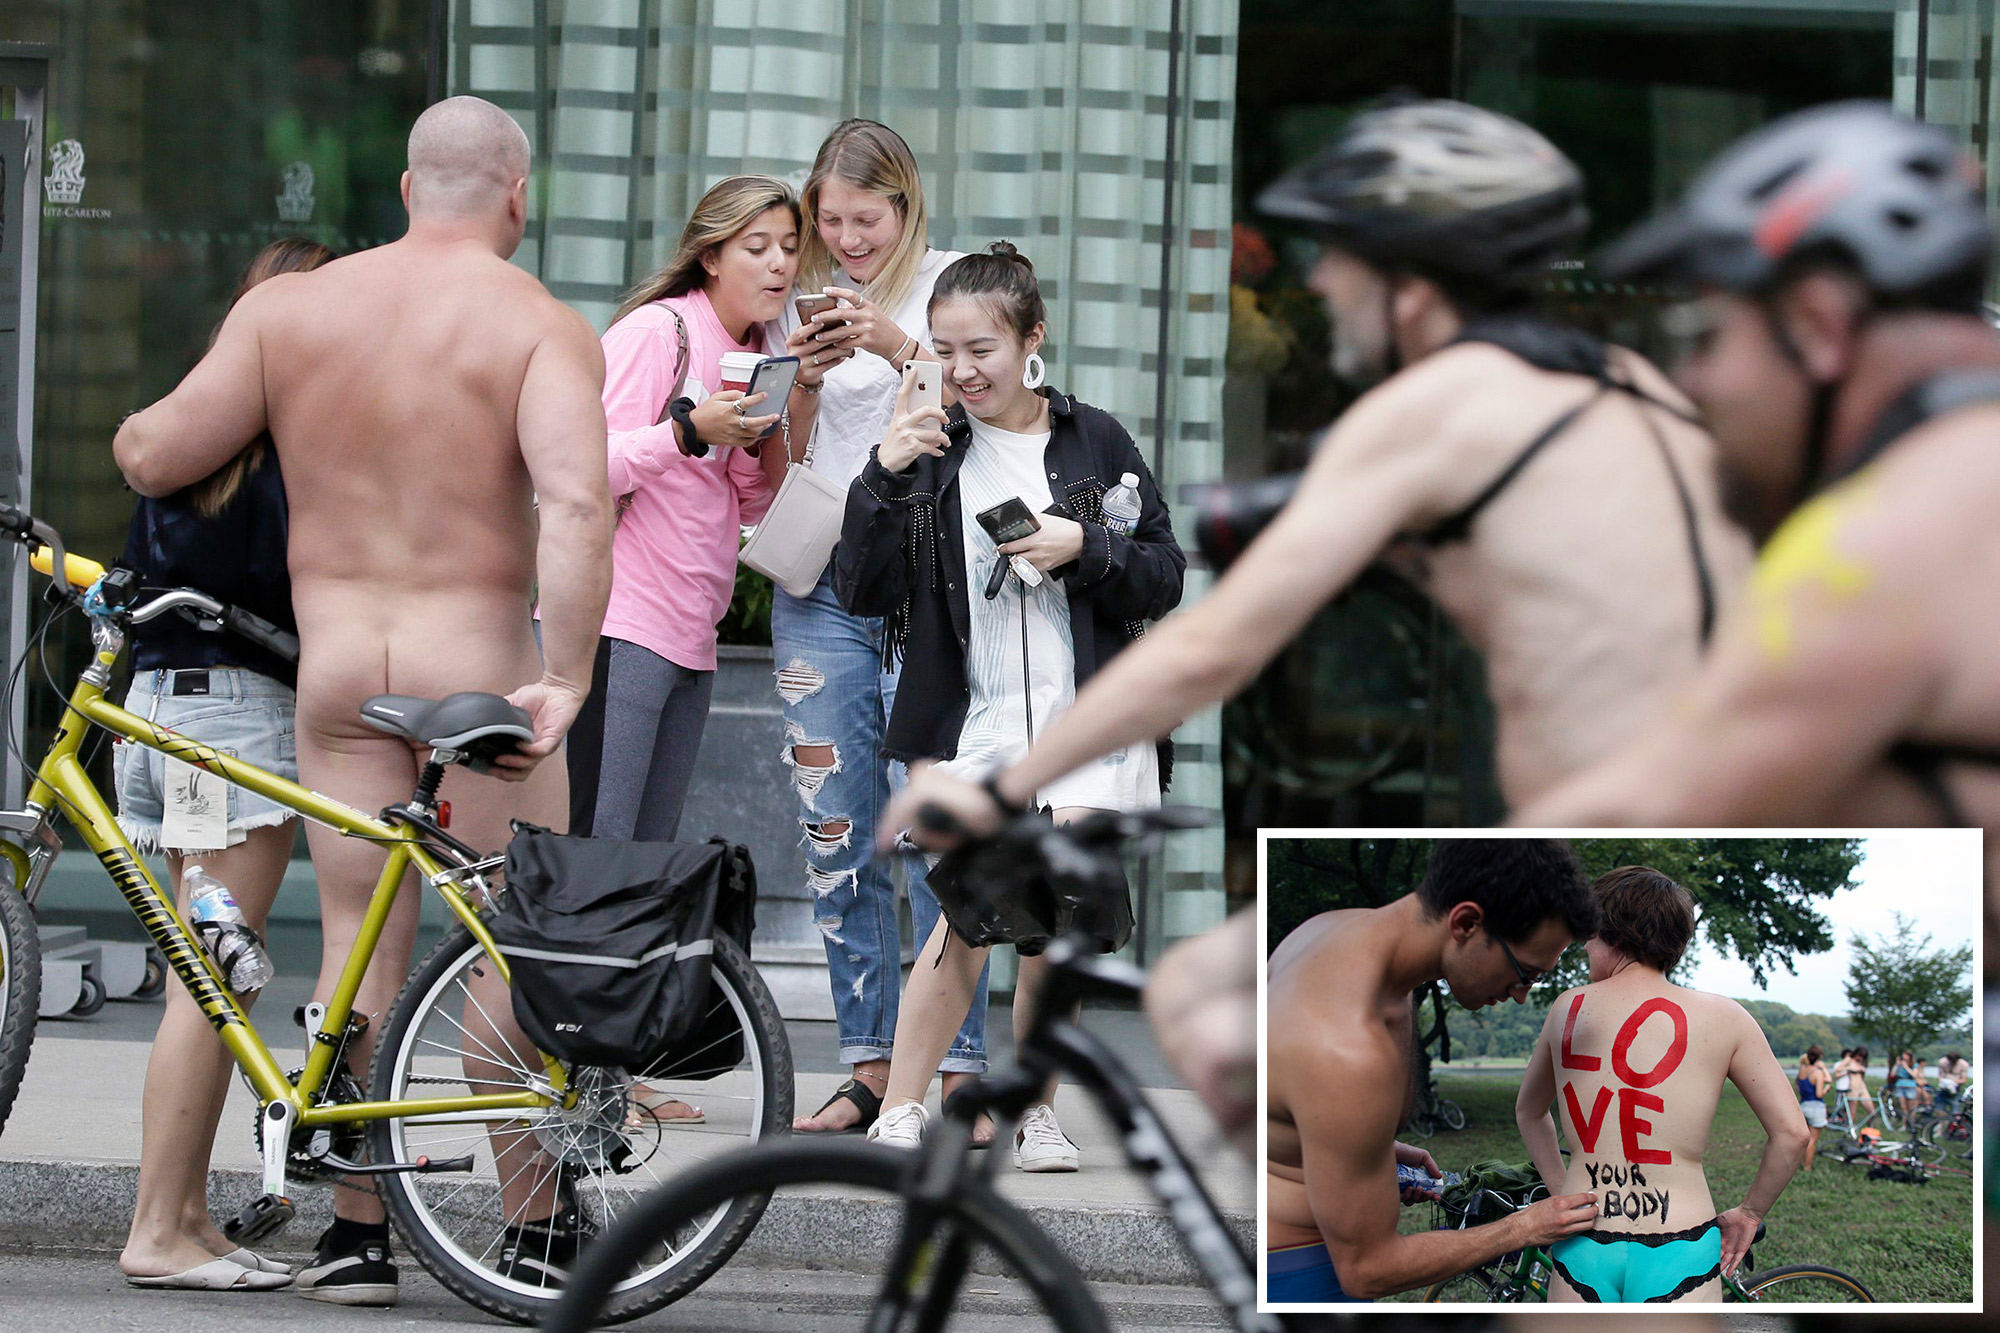 Best of Philly naked bike ride pics